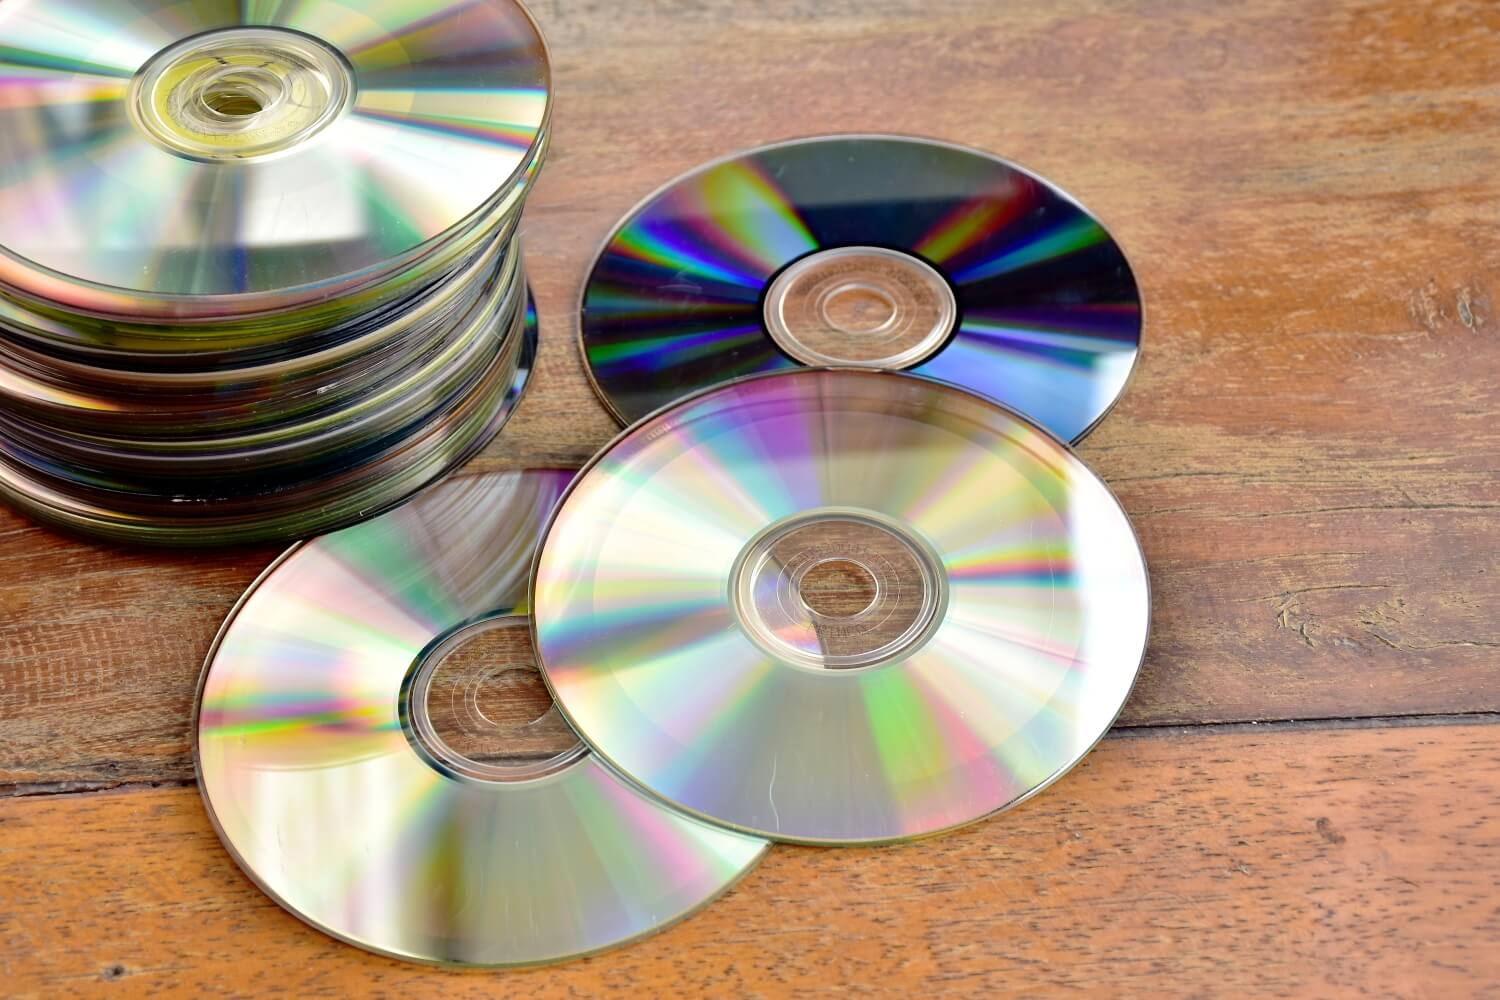 Your old disc-based backups may be in danger of being lost forever